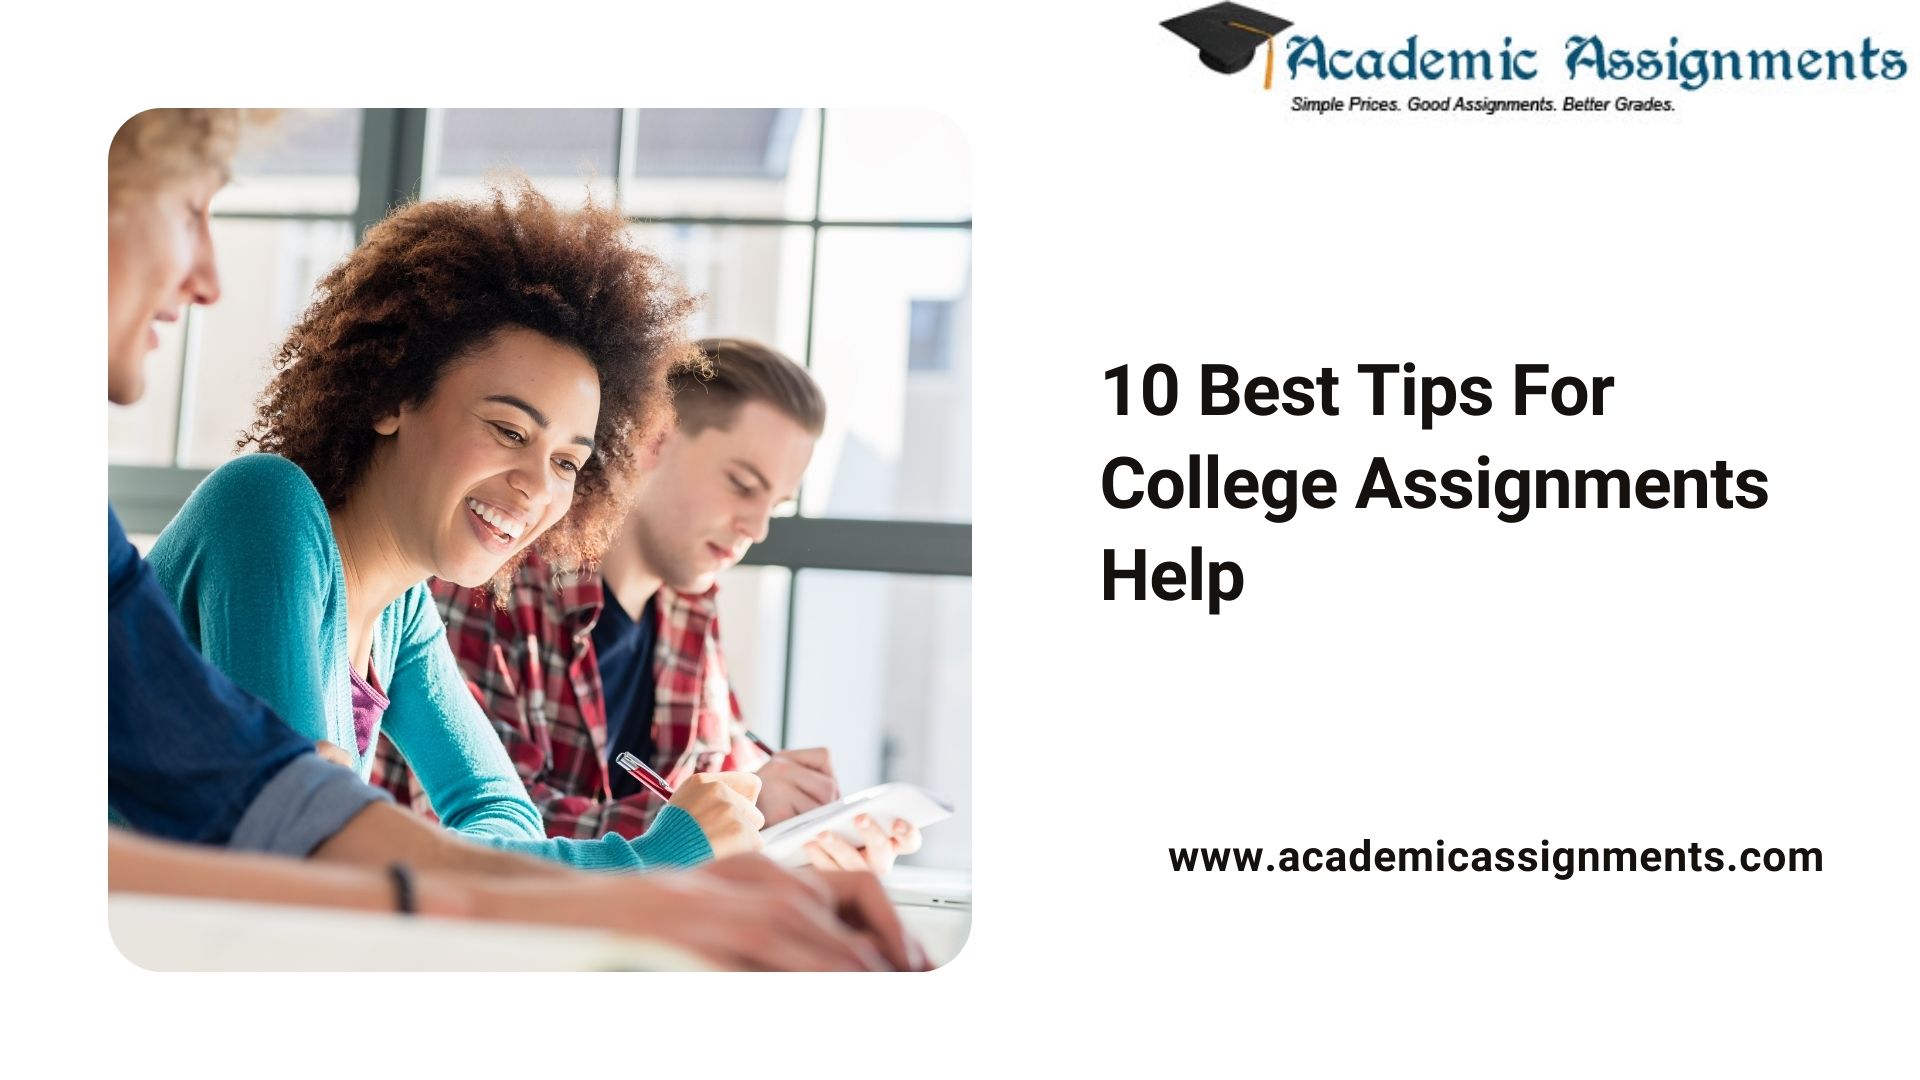 10 Best Tips For College Assignments Help